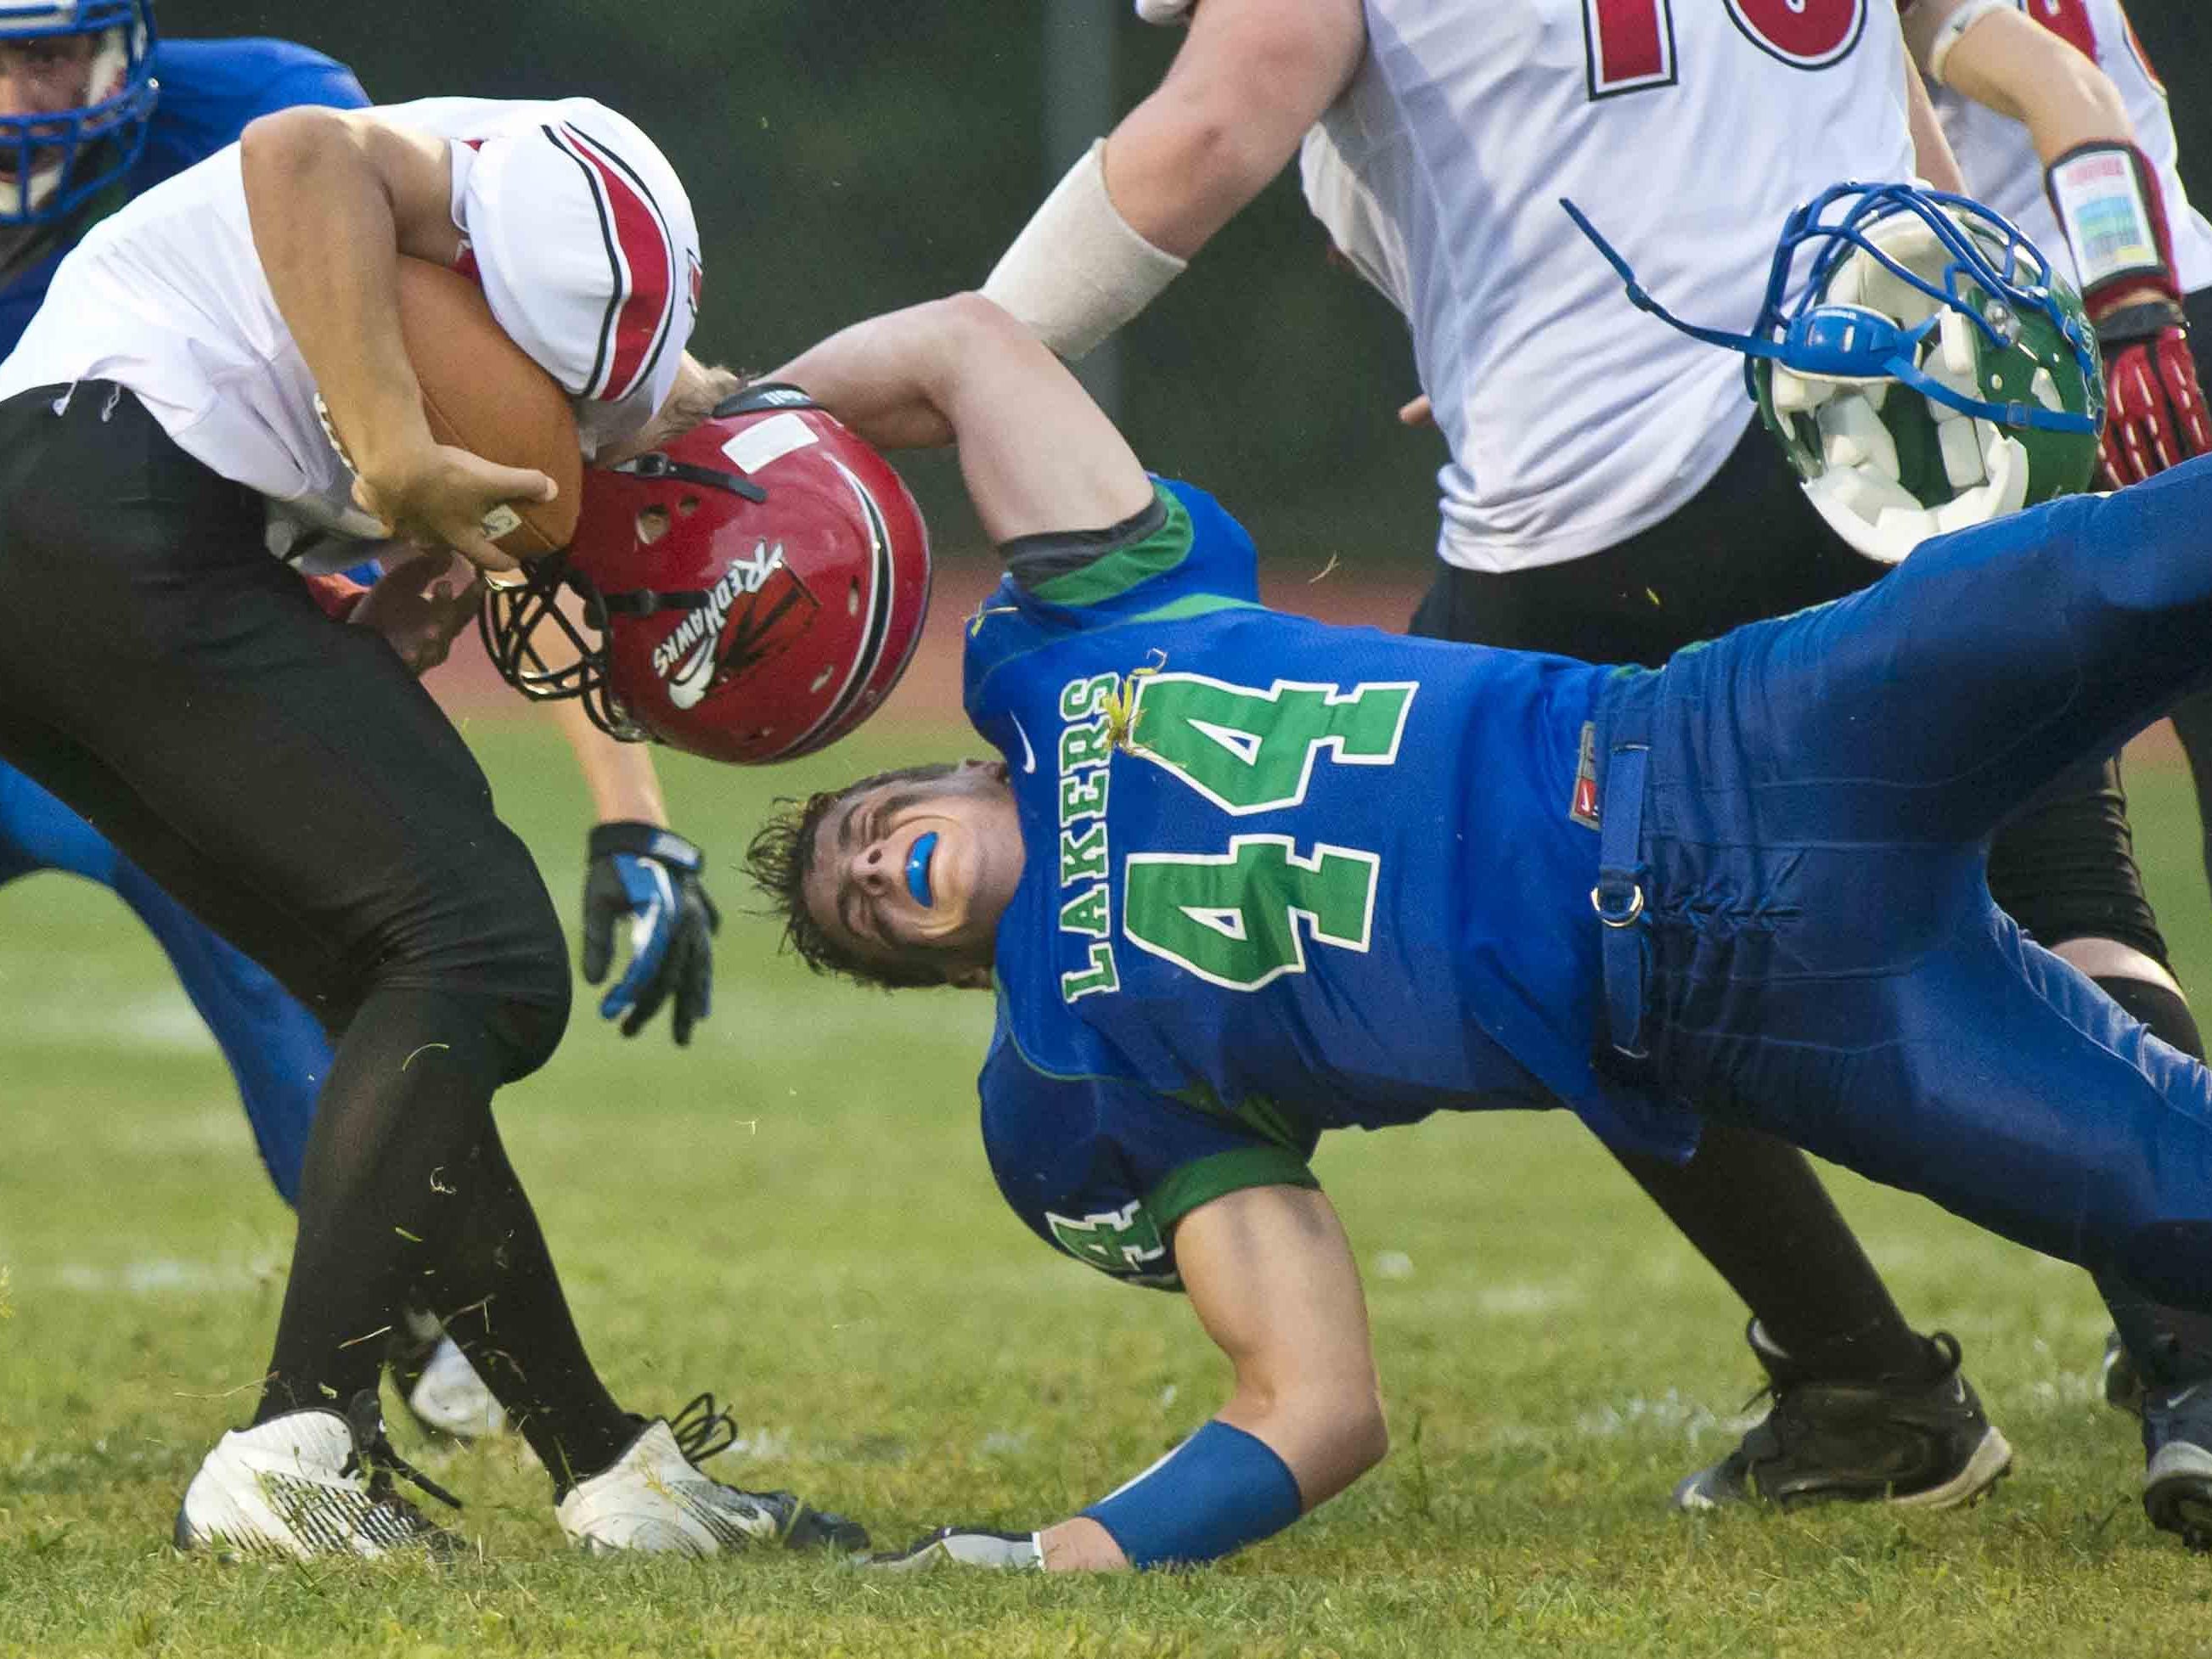 Colchester’s Grant Cummings (right) loses his helmet as he tries to tackle Champlain Valley Union's Andrew Bortnick in a 2013 high school football game.